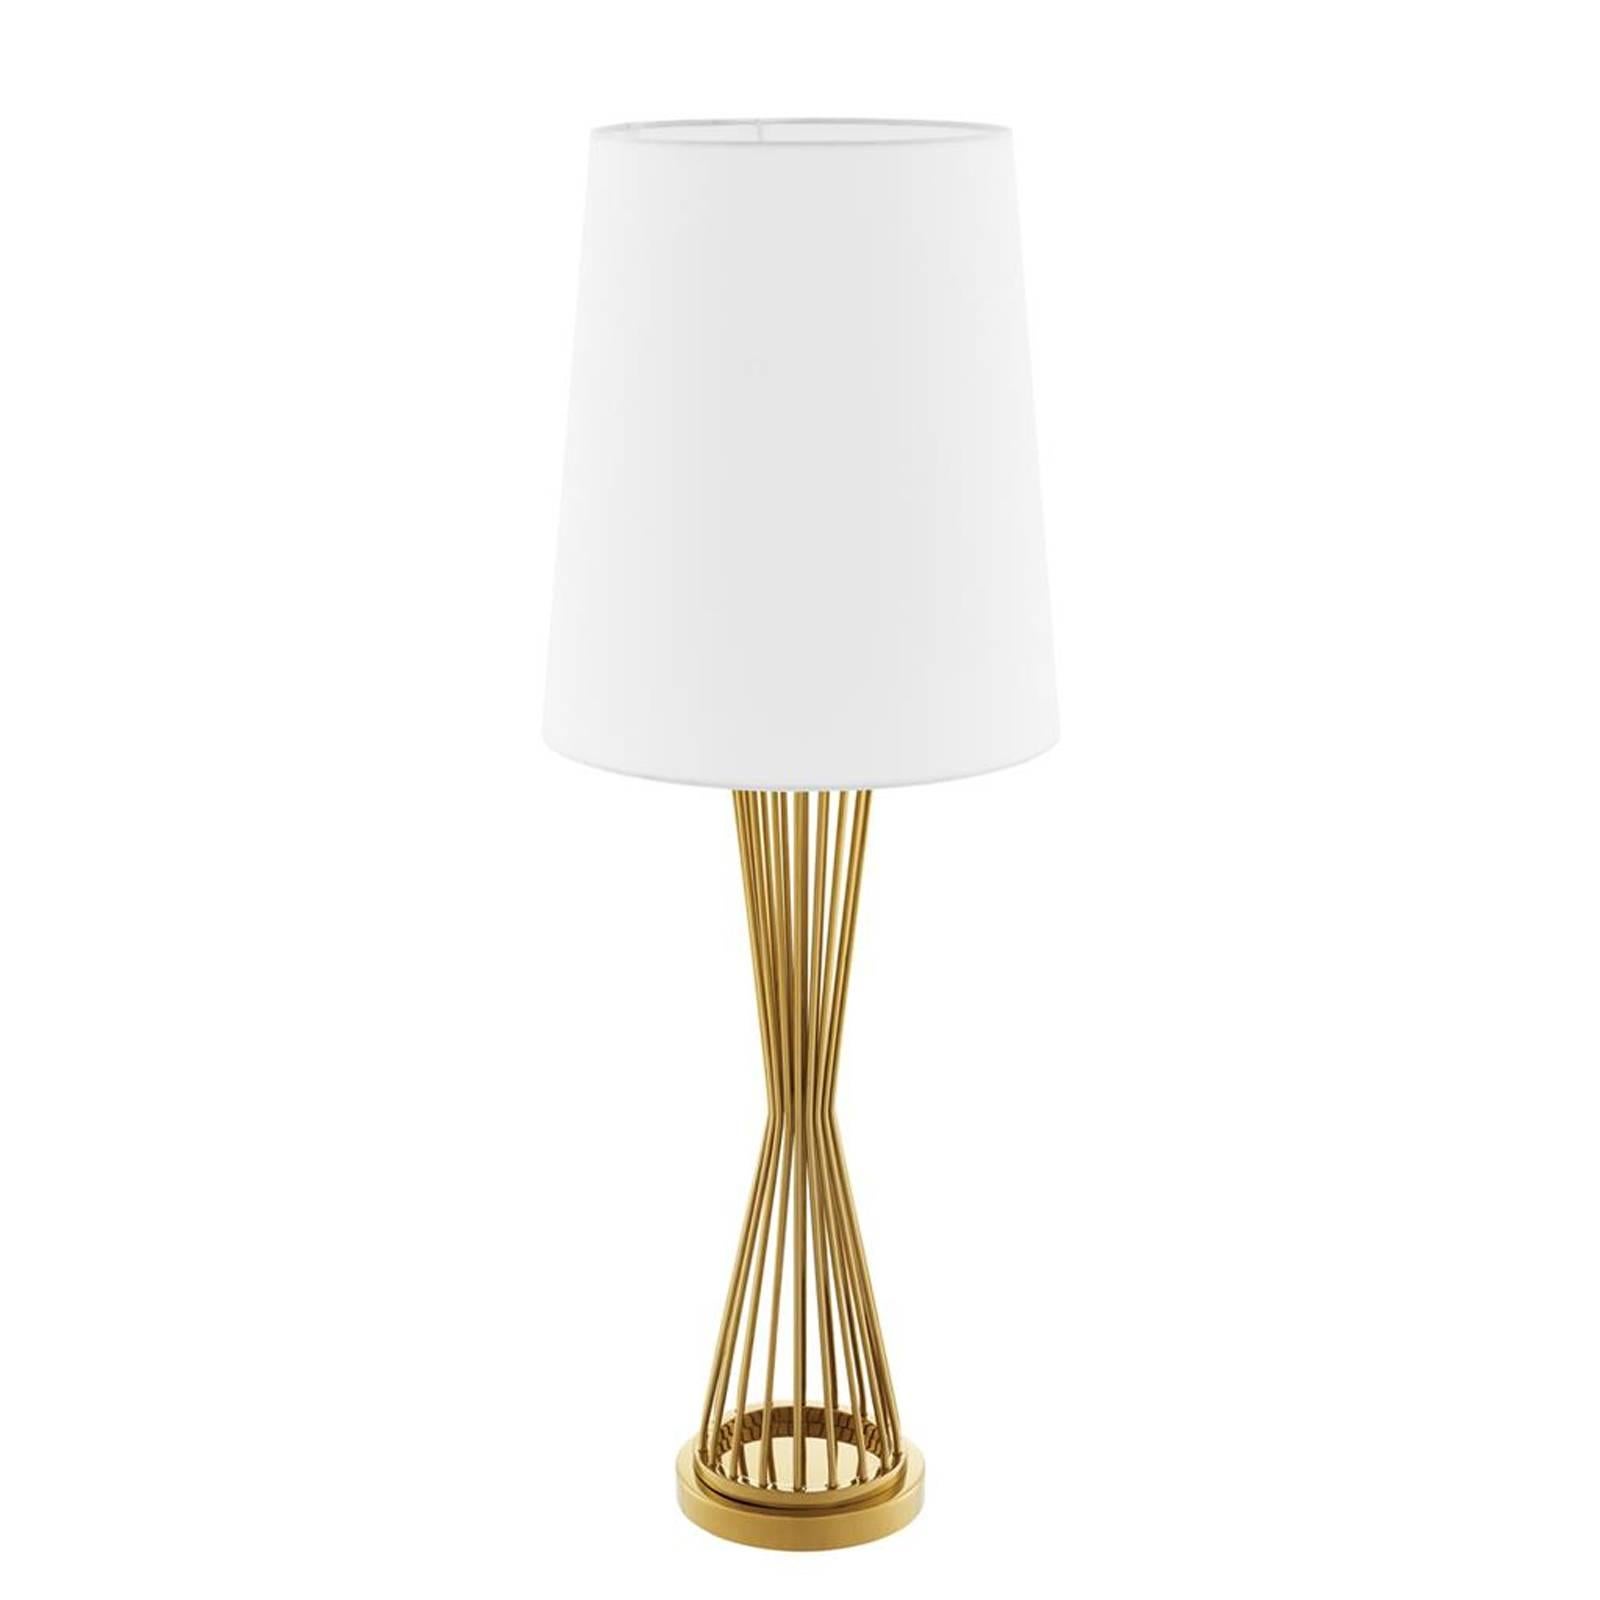 Chinese Barnet Table Lamp in Gold or Nickel Finish